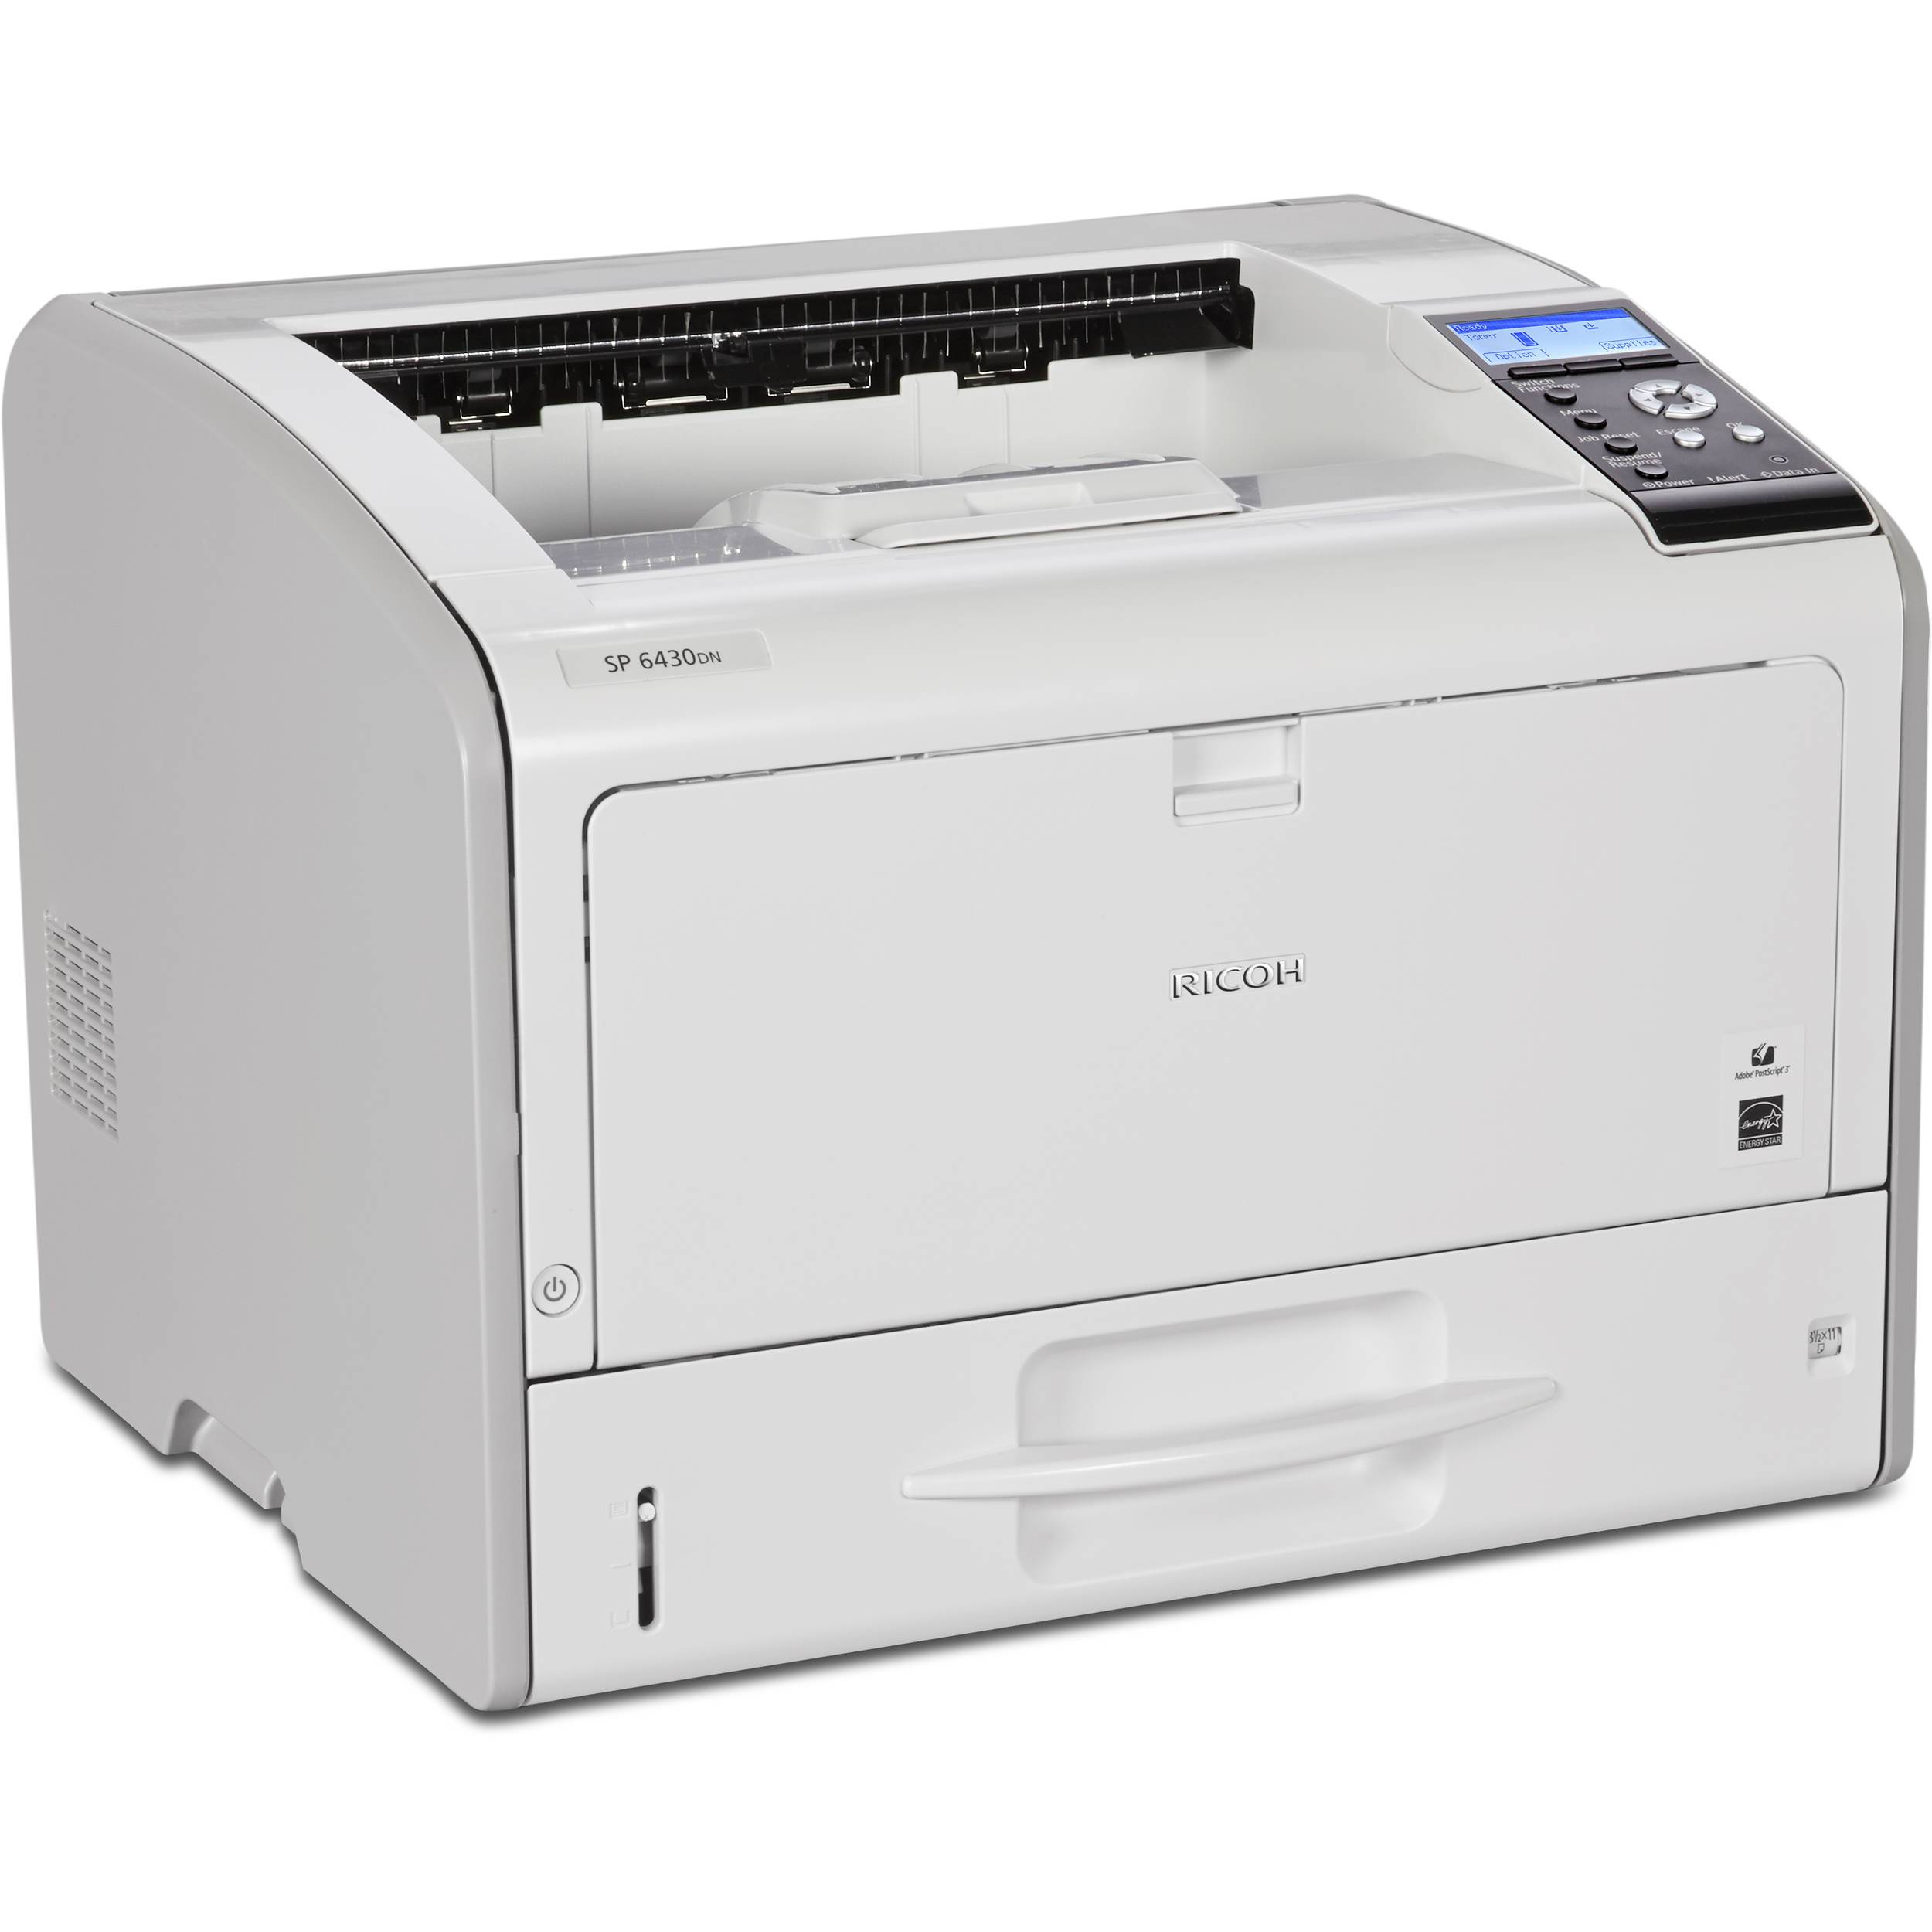 Absolute Toner $24.50/Month Ricoh SP 6430DN Laser Monochrome LED Printer, Small Size Super Economical (Optional 2nd Tray), 11x17 For Office Use Showroom Monochrome Copiers